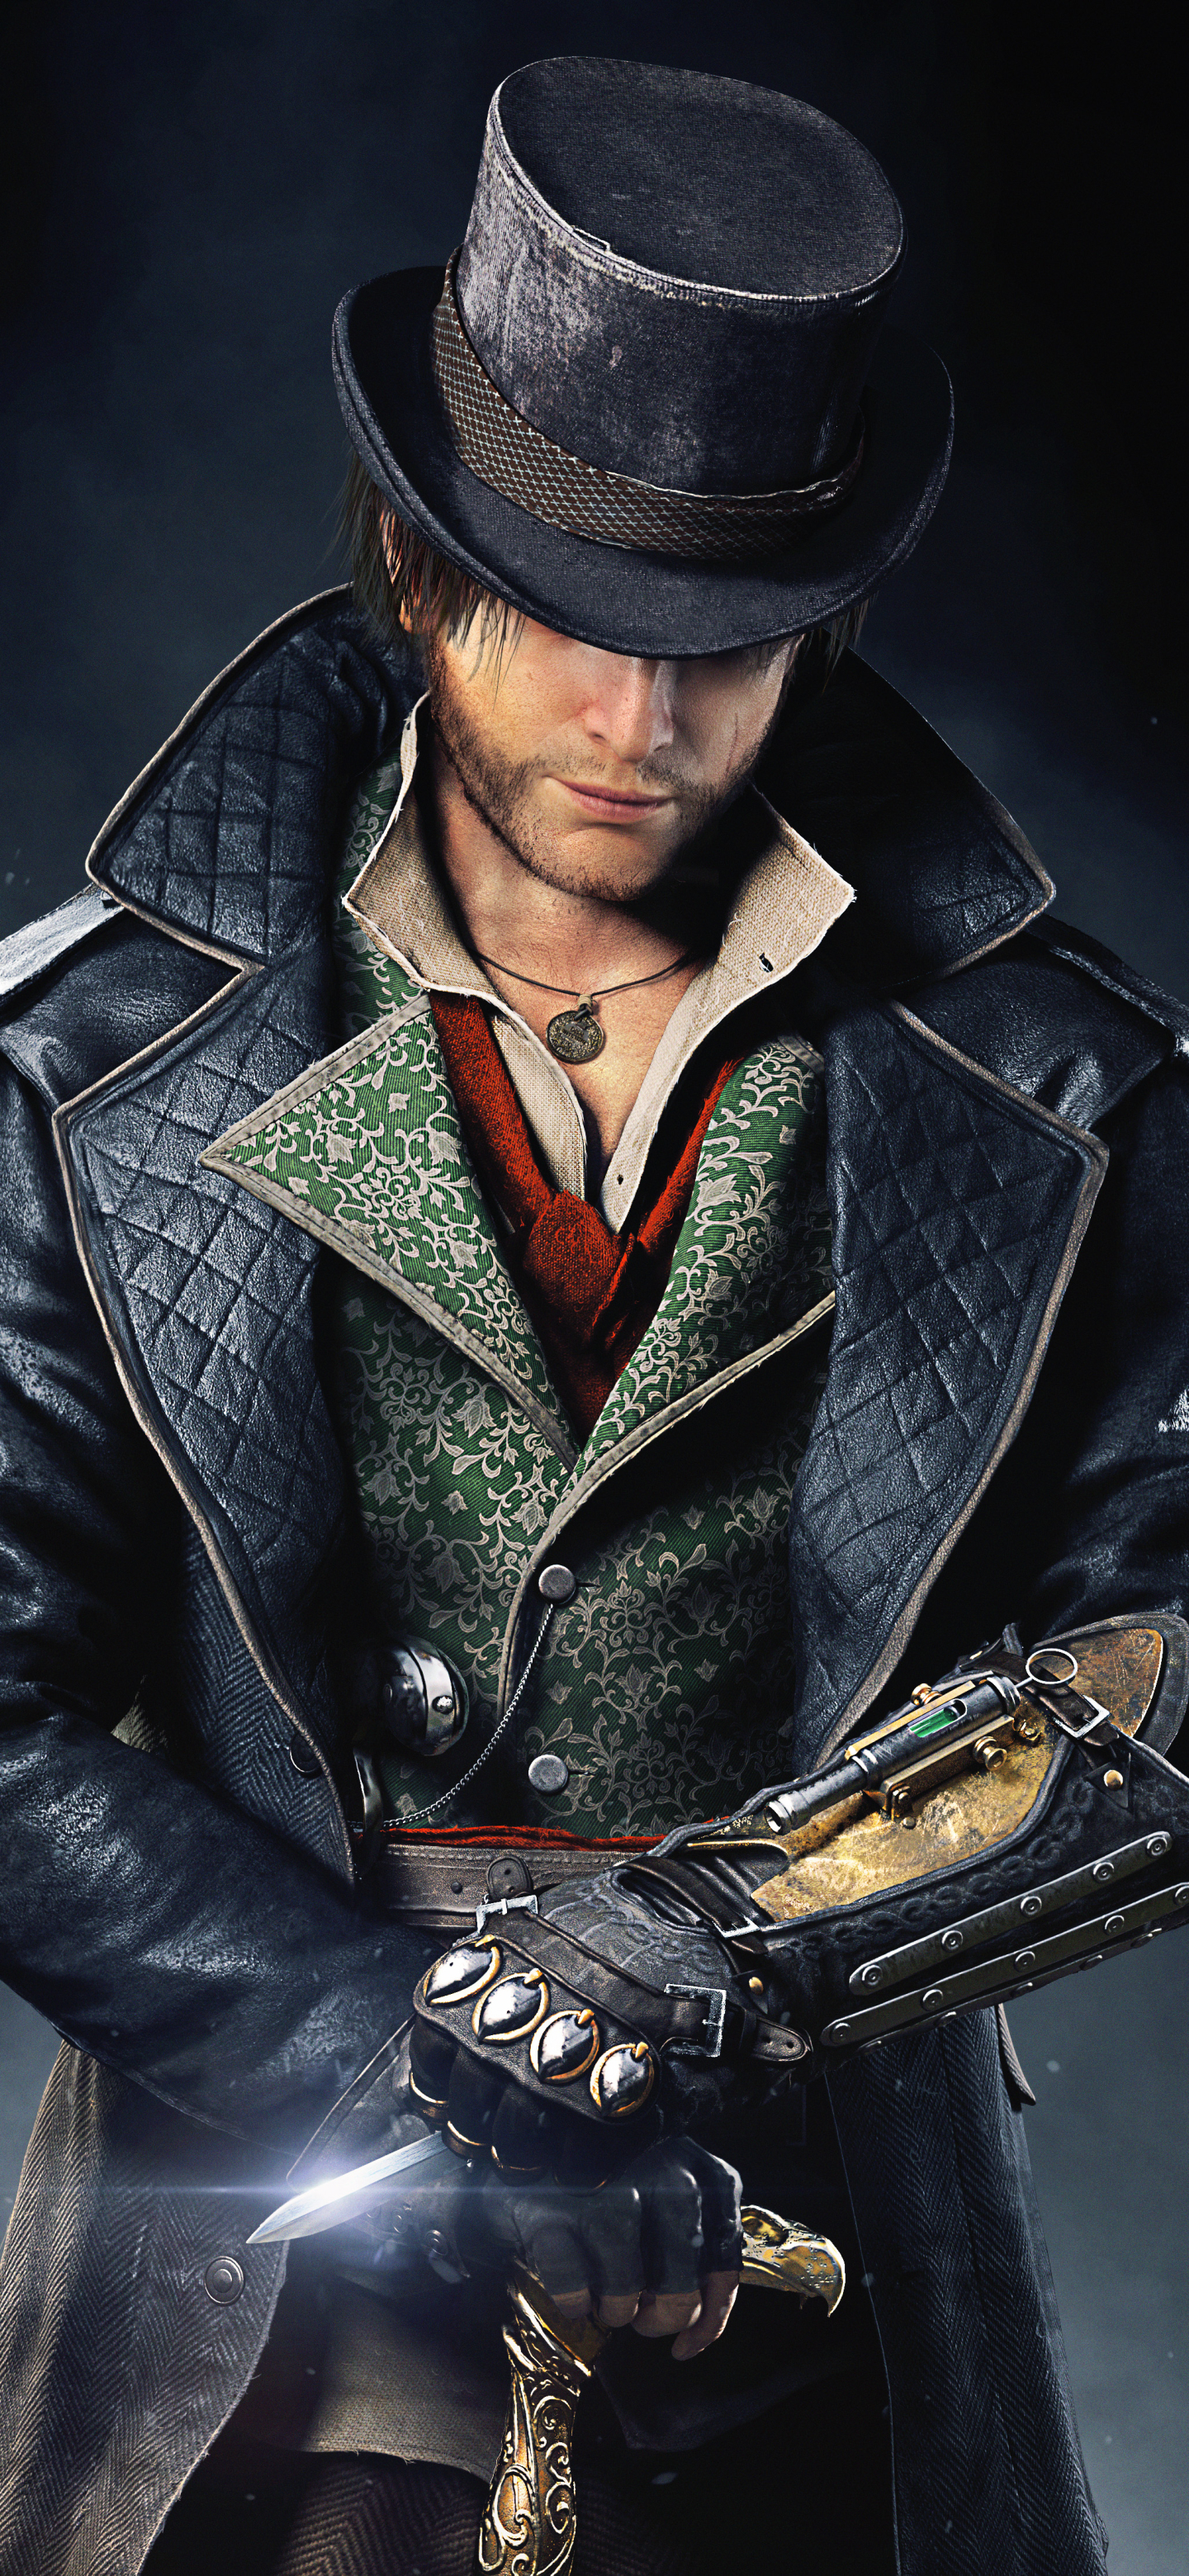 assassin's creed: syndicate, video game, jacob frye, assassin's creed